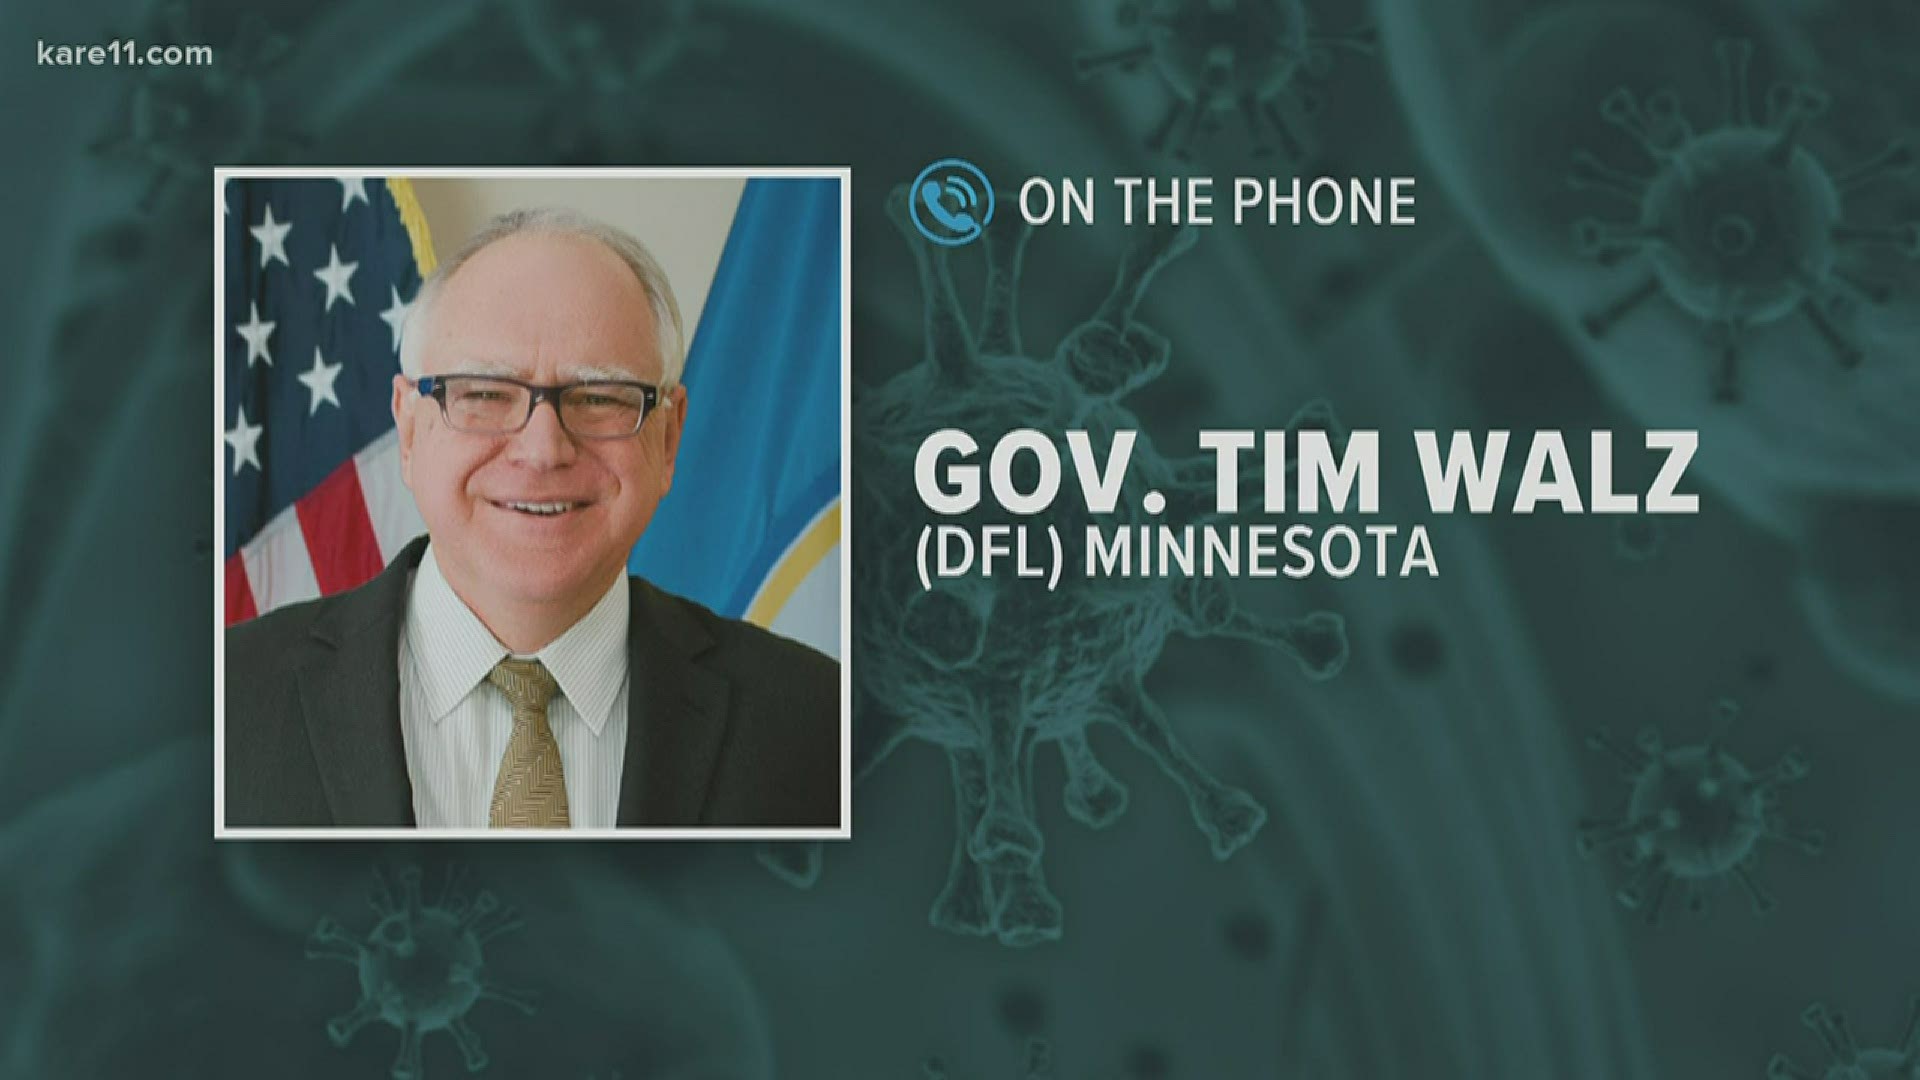 Minnesota Gov. Tim Walz continues to emphasize a "ramping up" of testing as the best way to get people back to work amid the COVID-19 pandemic.